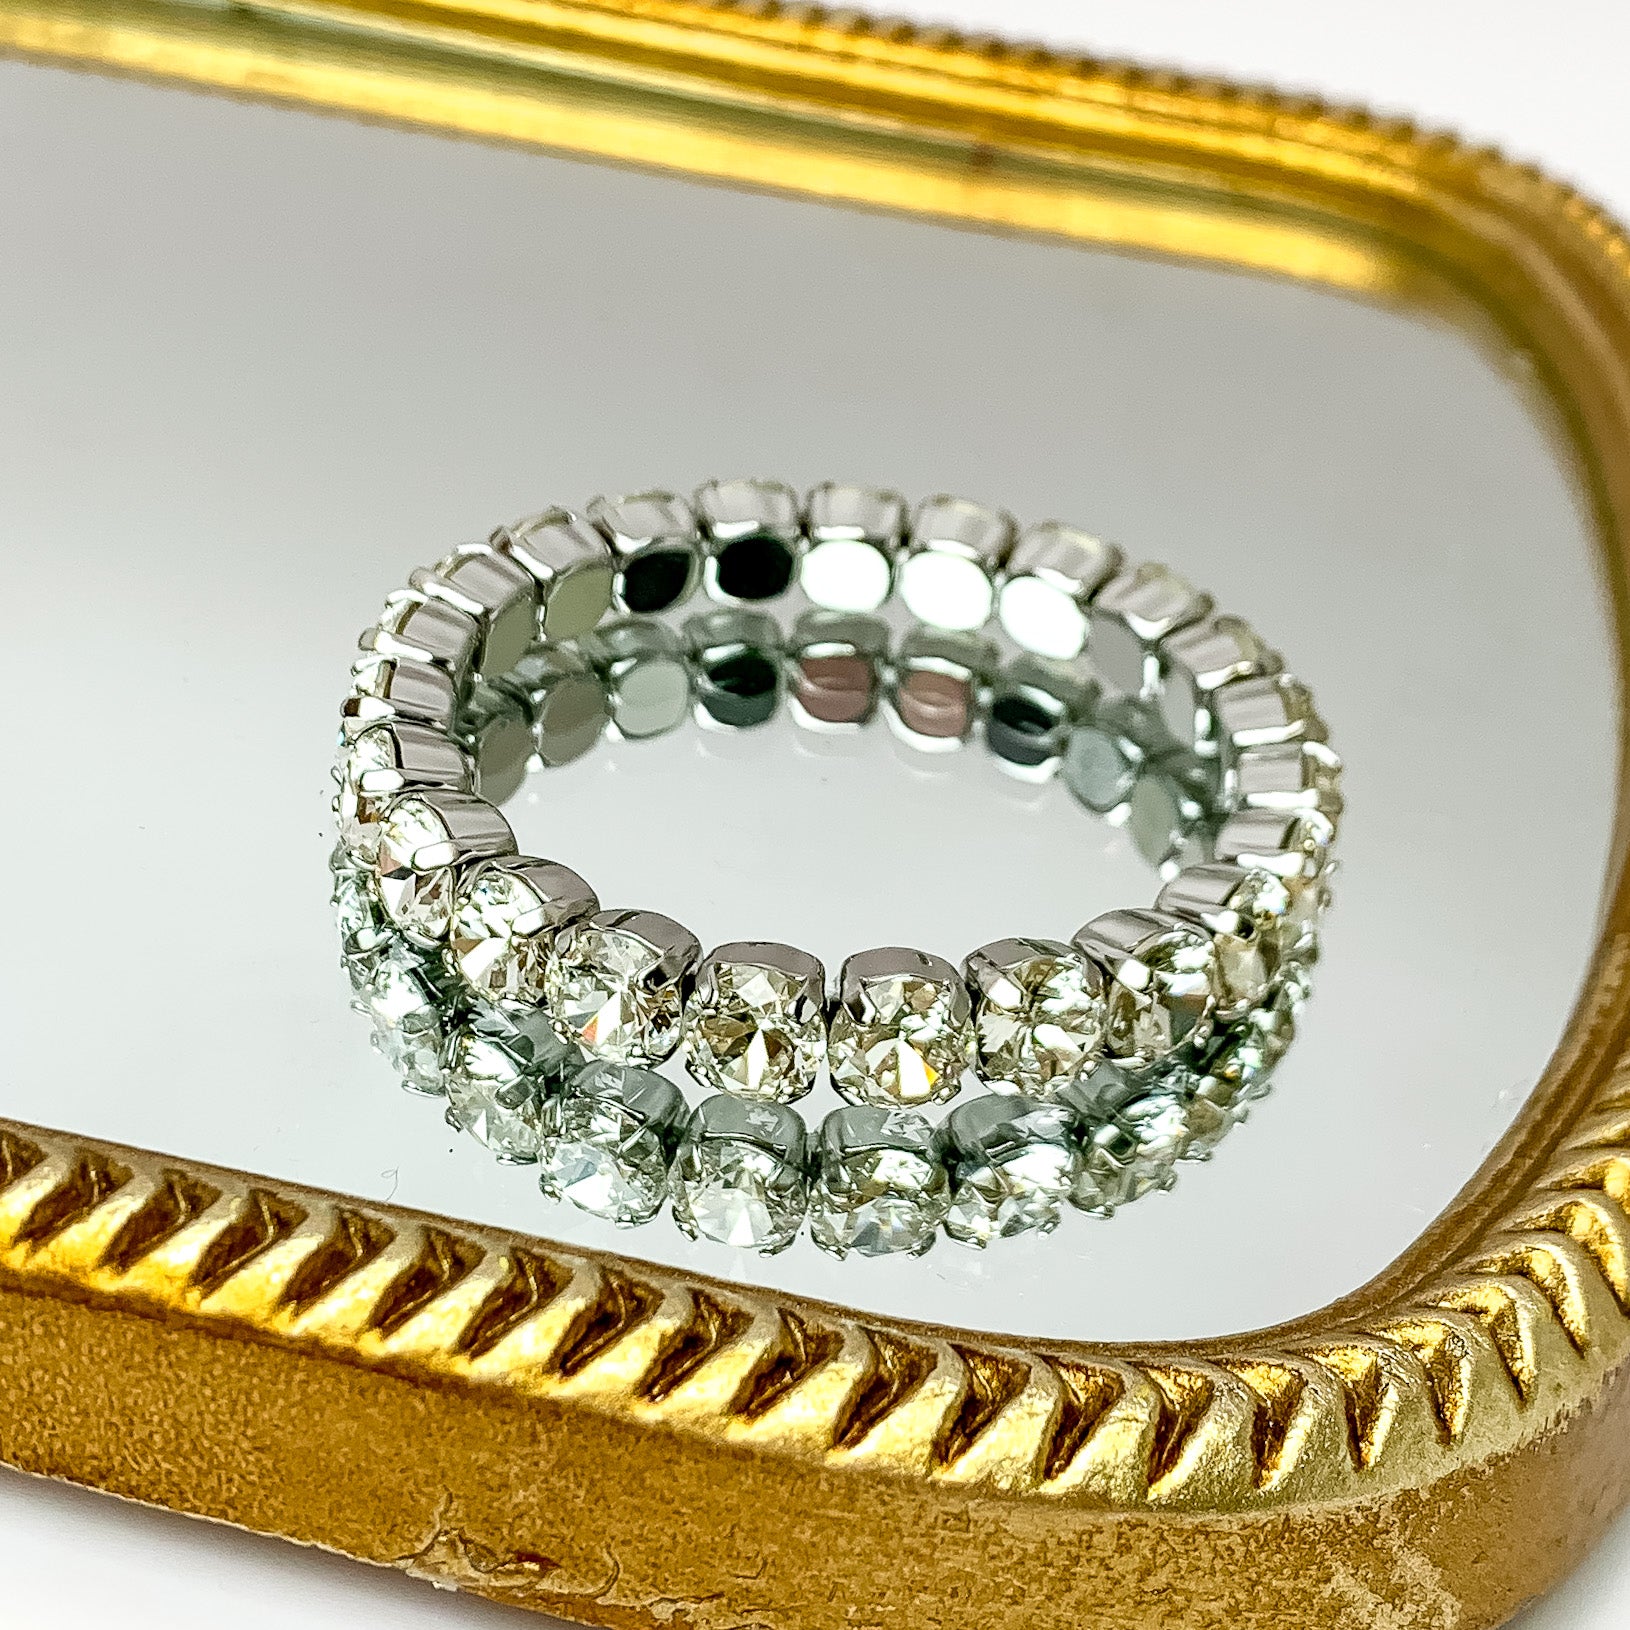 Single crystal layered bracelet stretchy to fit most wrists with silver undertones. Pictured on a mirror with a gold frame